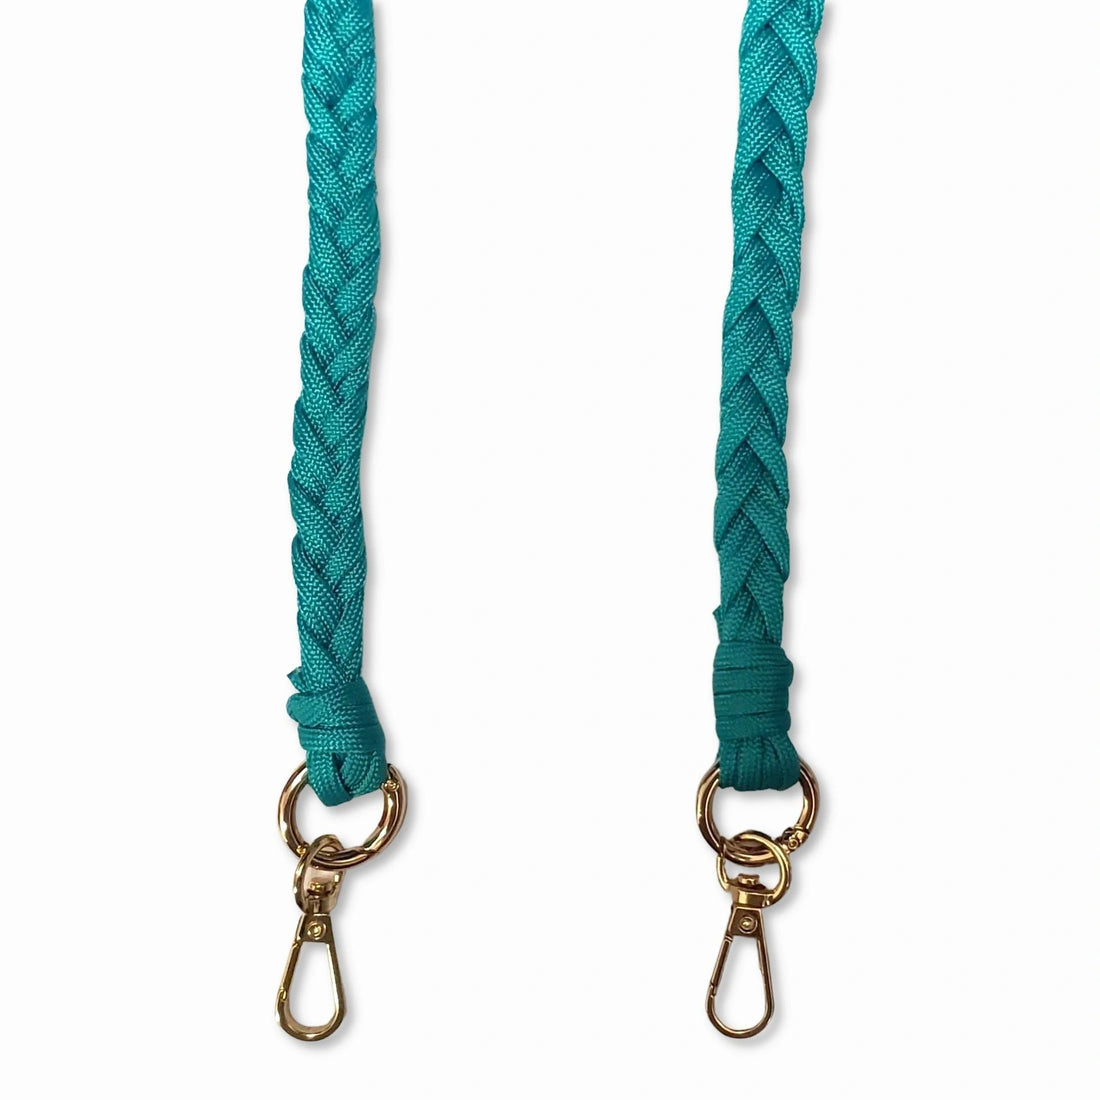 Stella - Braided Cord Phone Chain with Golden Carabiners